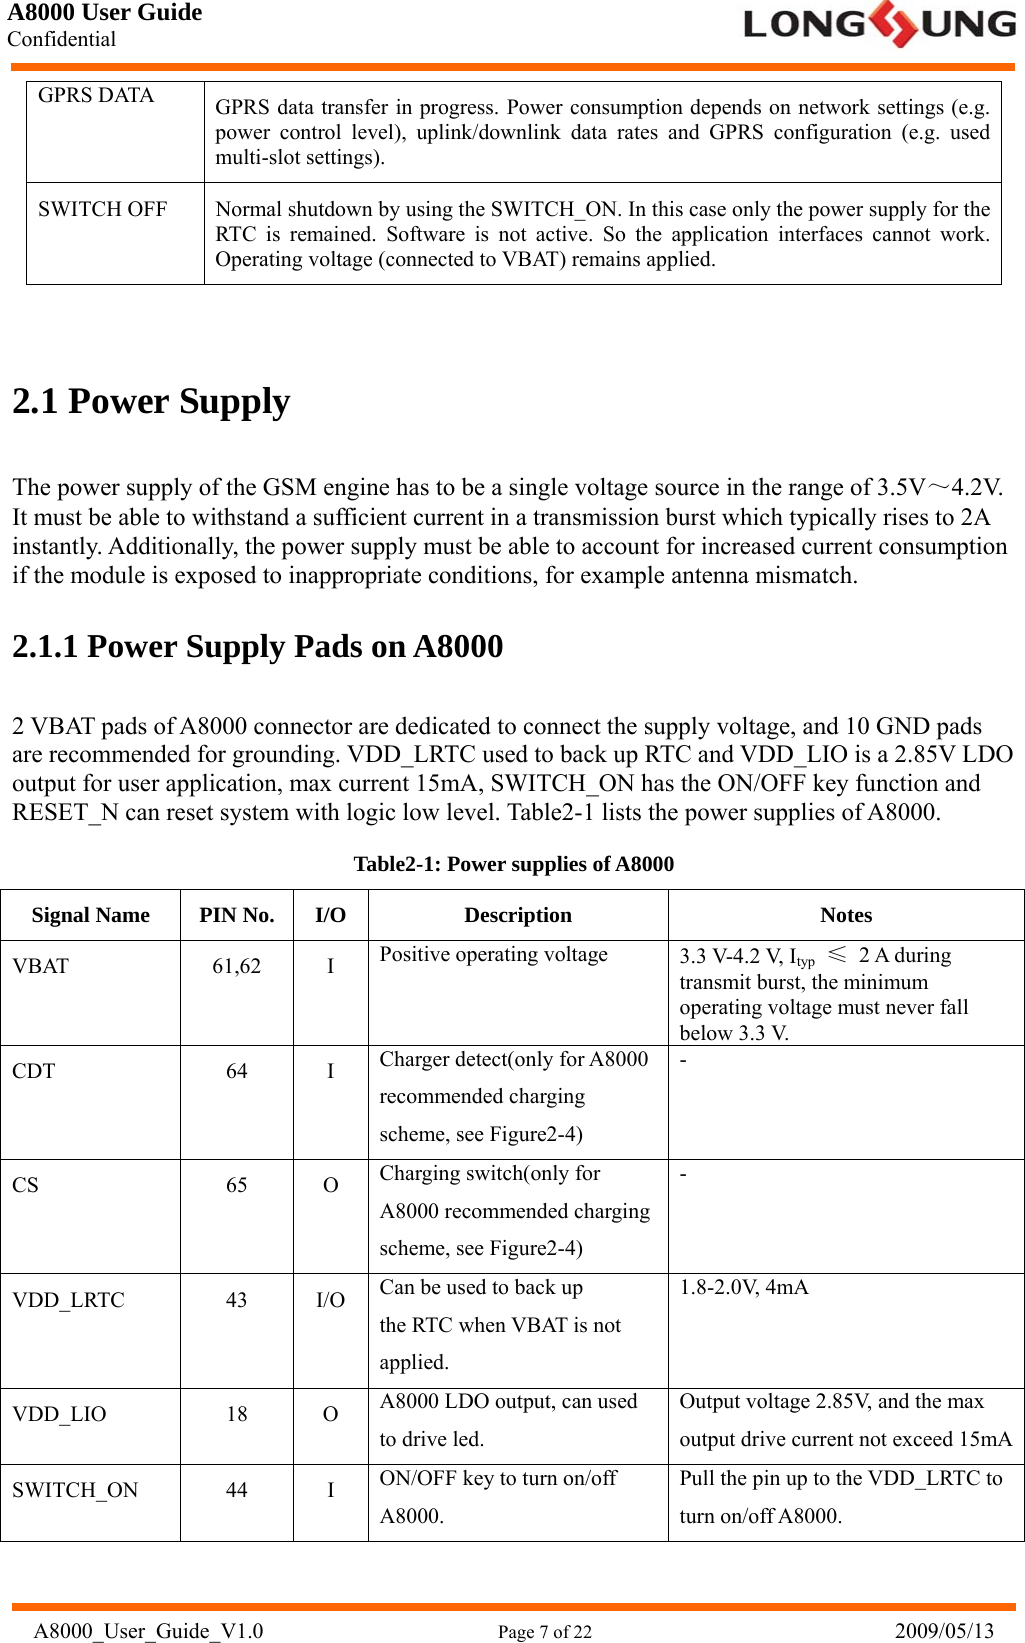 A8000 User Guide Confidential   A8000_User_Guide_V1.0                      Page 7 of 22                            2009/05/13 GPRS DATA  GPRS data transfer in progress. Power consumption depends on network settings (e.g. power control level), uplink/downlink data rates and GPRS configuration (e.g. used multi-slot settings). SWITCH OFF  Normal shutdown by using the SWITCH_ON. In this case only the power supply for the RTC is remained. Software is not active. So the application interfaces cannot work. Operating voltage (connected to VBAT) remains applied.  2.1 Power Supply The power supply of the GSM engine has to be a single voltage source in the range of 3.5V～4.2V. It must be able to withstand a sufficient current in a transmission burst which typically rises to 2A instantly. Additionally, the power supply must be able to account for increased current consumption if the module is exposed to inappropriate conditions, for example antenna mismatch. 2.1.1 Power Supply Pads on A8000 2 VBAT pads of A8000 connector are dedicated to connect the supply voltage, and 10 GND pads are recommended for grounding. VDD_LRTC used to back up RTC and VDD_LIO is a 2.85V LDO output for user application, max current 15mA, SWITCH_ON has the ON/OFF key function and RESET_N can reset system with logic low level. Table2-1 lists the power supplies of A8000. Table2-1: Power supplies of A8000 Signal Name  PIN No. I/O  Description  Notes VBAT 61,62 I Positive operating voltage  3.3 V-4.2 V, Ityp ≤ 2 A during transmit burst, the minimum operating voltage must never fall below 3.3 V. CDT 64 I Charger detect(only for A8000 recommended charging scheme, see Figure2-4) - CS 65 O Charging switch(only for A8000 recommended charging scheme, see Figure2-4) - VDD_LRTC 43 I/O Can be used to back up the RTC when VBAT is not applied. 1.8-2.0V, 4mA VDD_LIO 18 O A8000 LDO output, can used to drive led. Output voltage 2.85V, and the max output drive current not exceed 15mASWITCH_ON 44 I ON/OFF key to turn on/off A8000. Pull the pin up to the VDD_LRTC to turn on/off A8000. 